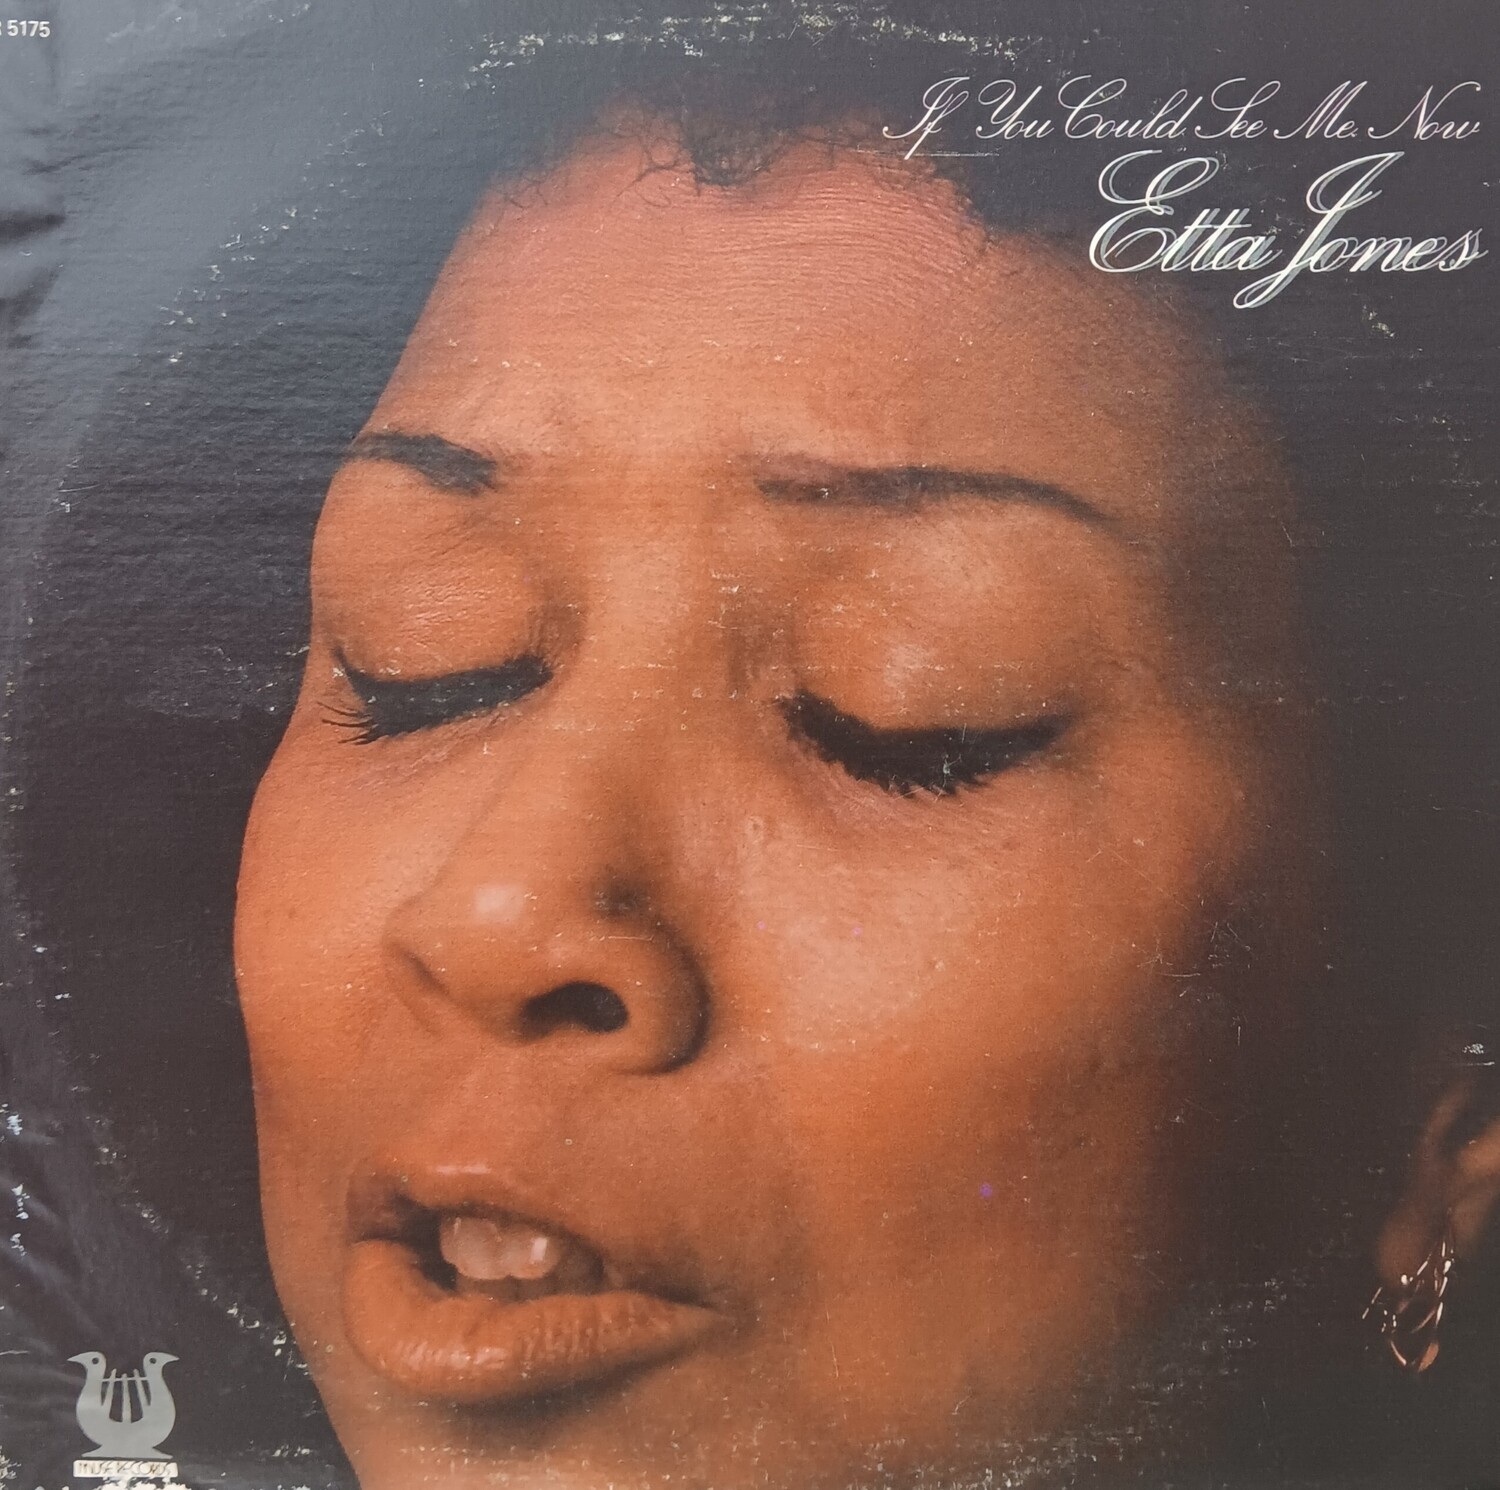 ETTA JONES - If you could see me now